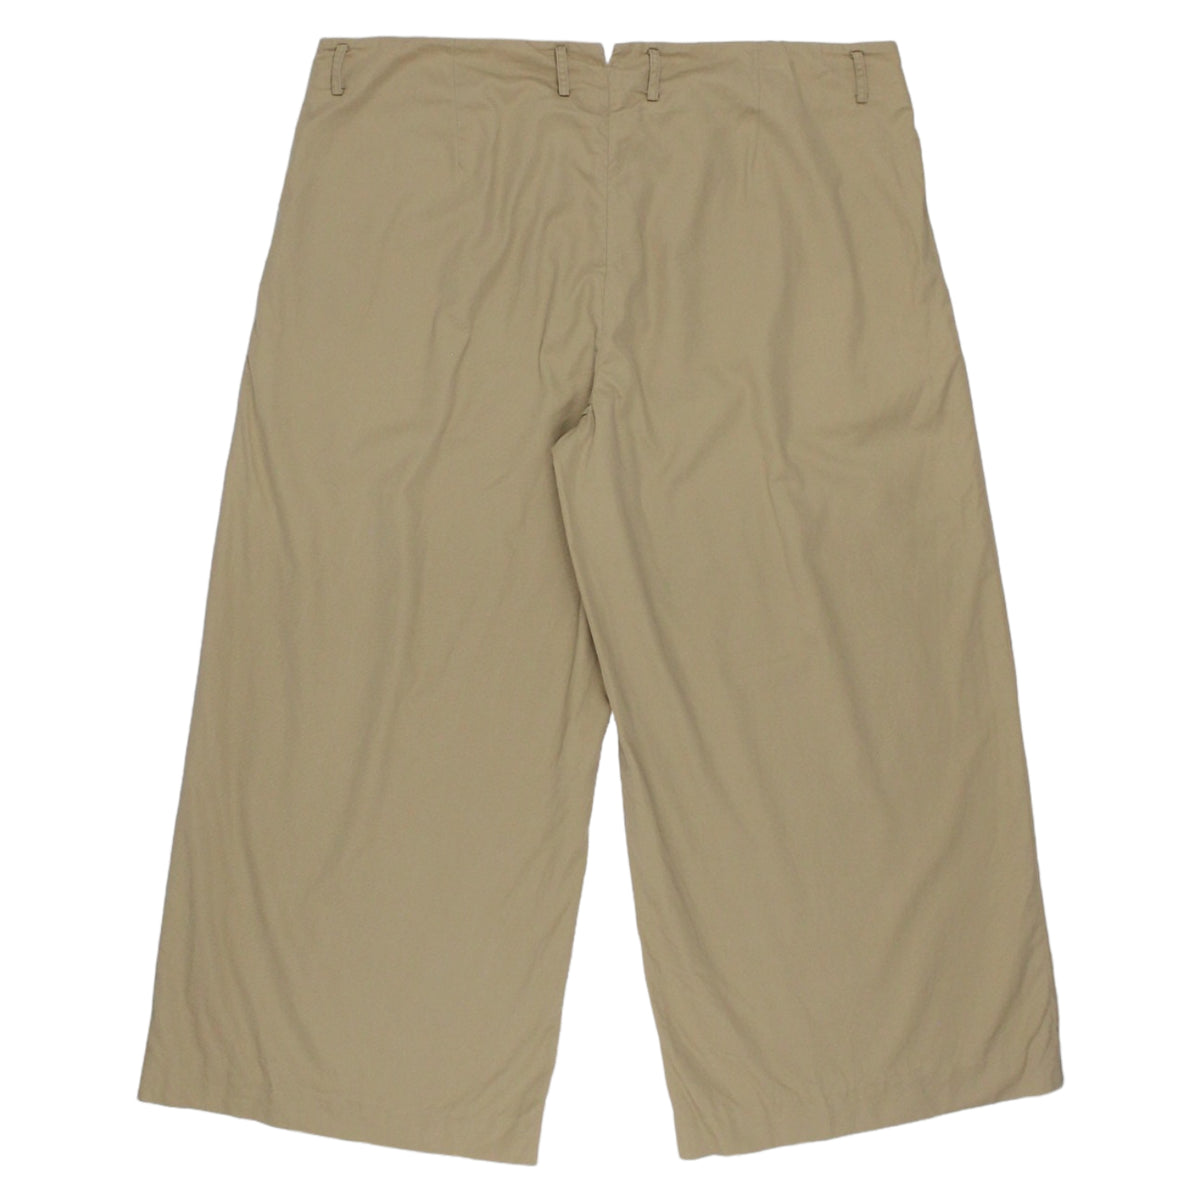 Ralph Lauren Sand, Cropped, Pleated Chino's